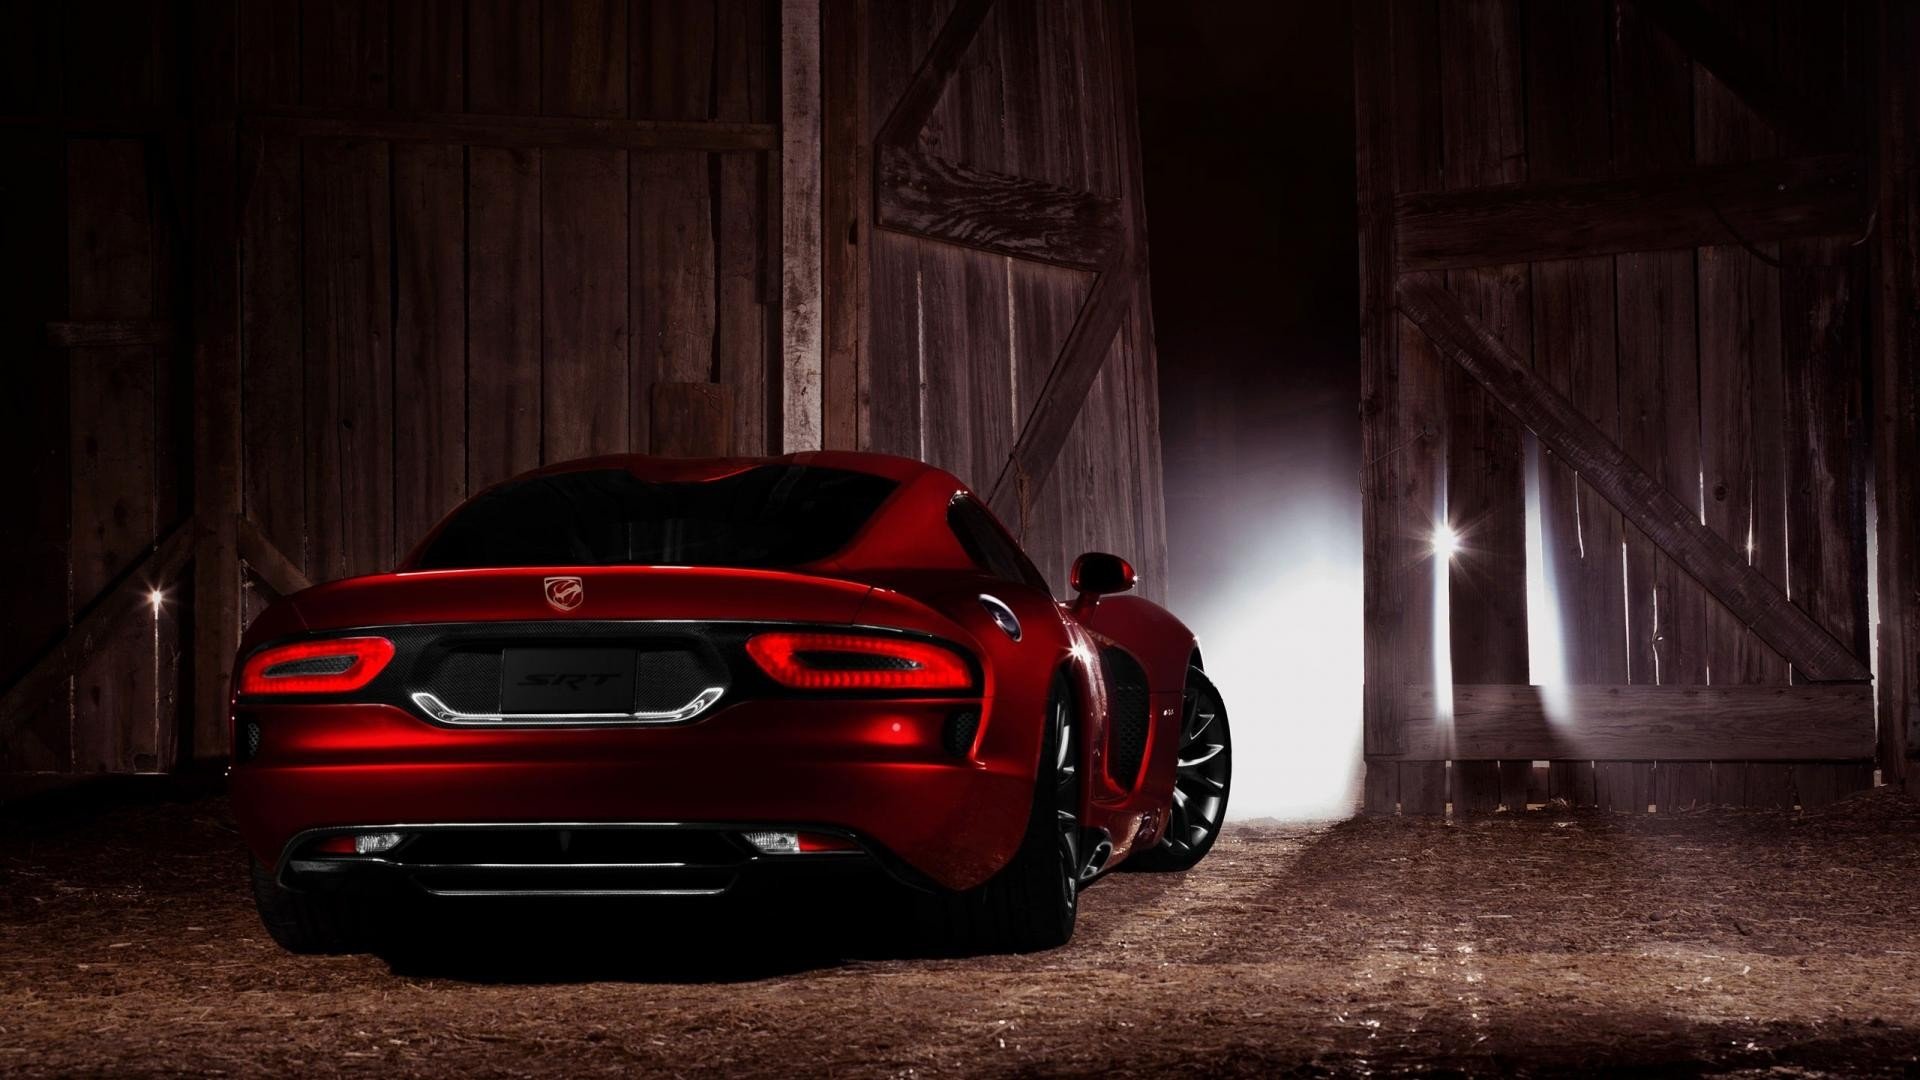 cars, Snakes, Dodge, Viper, Red, Cars Wallpaper